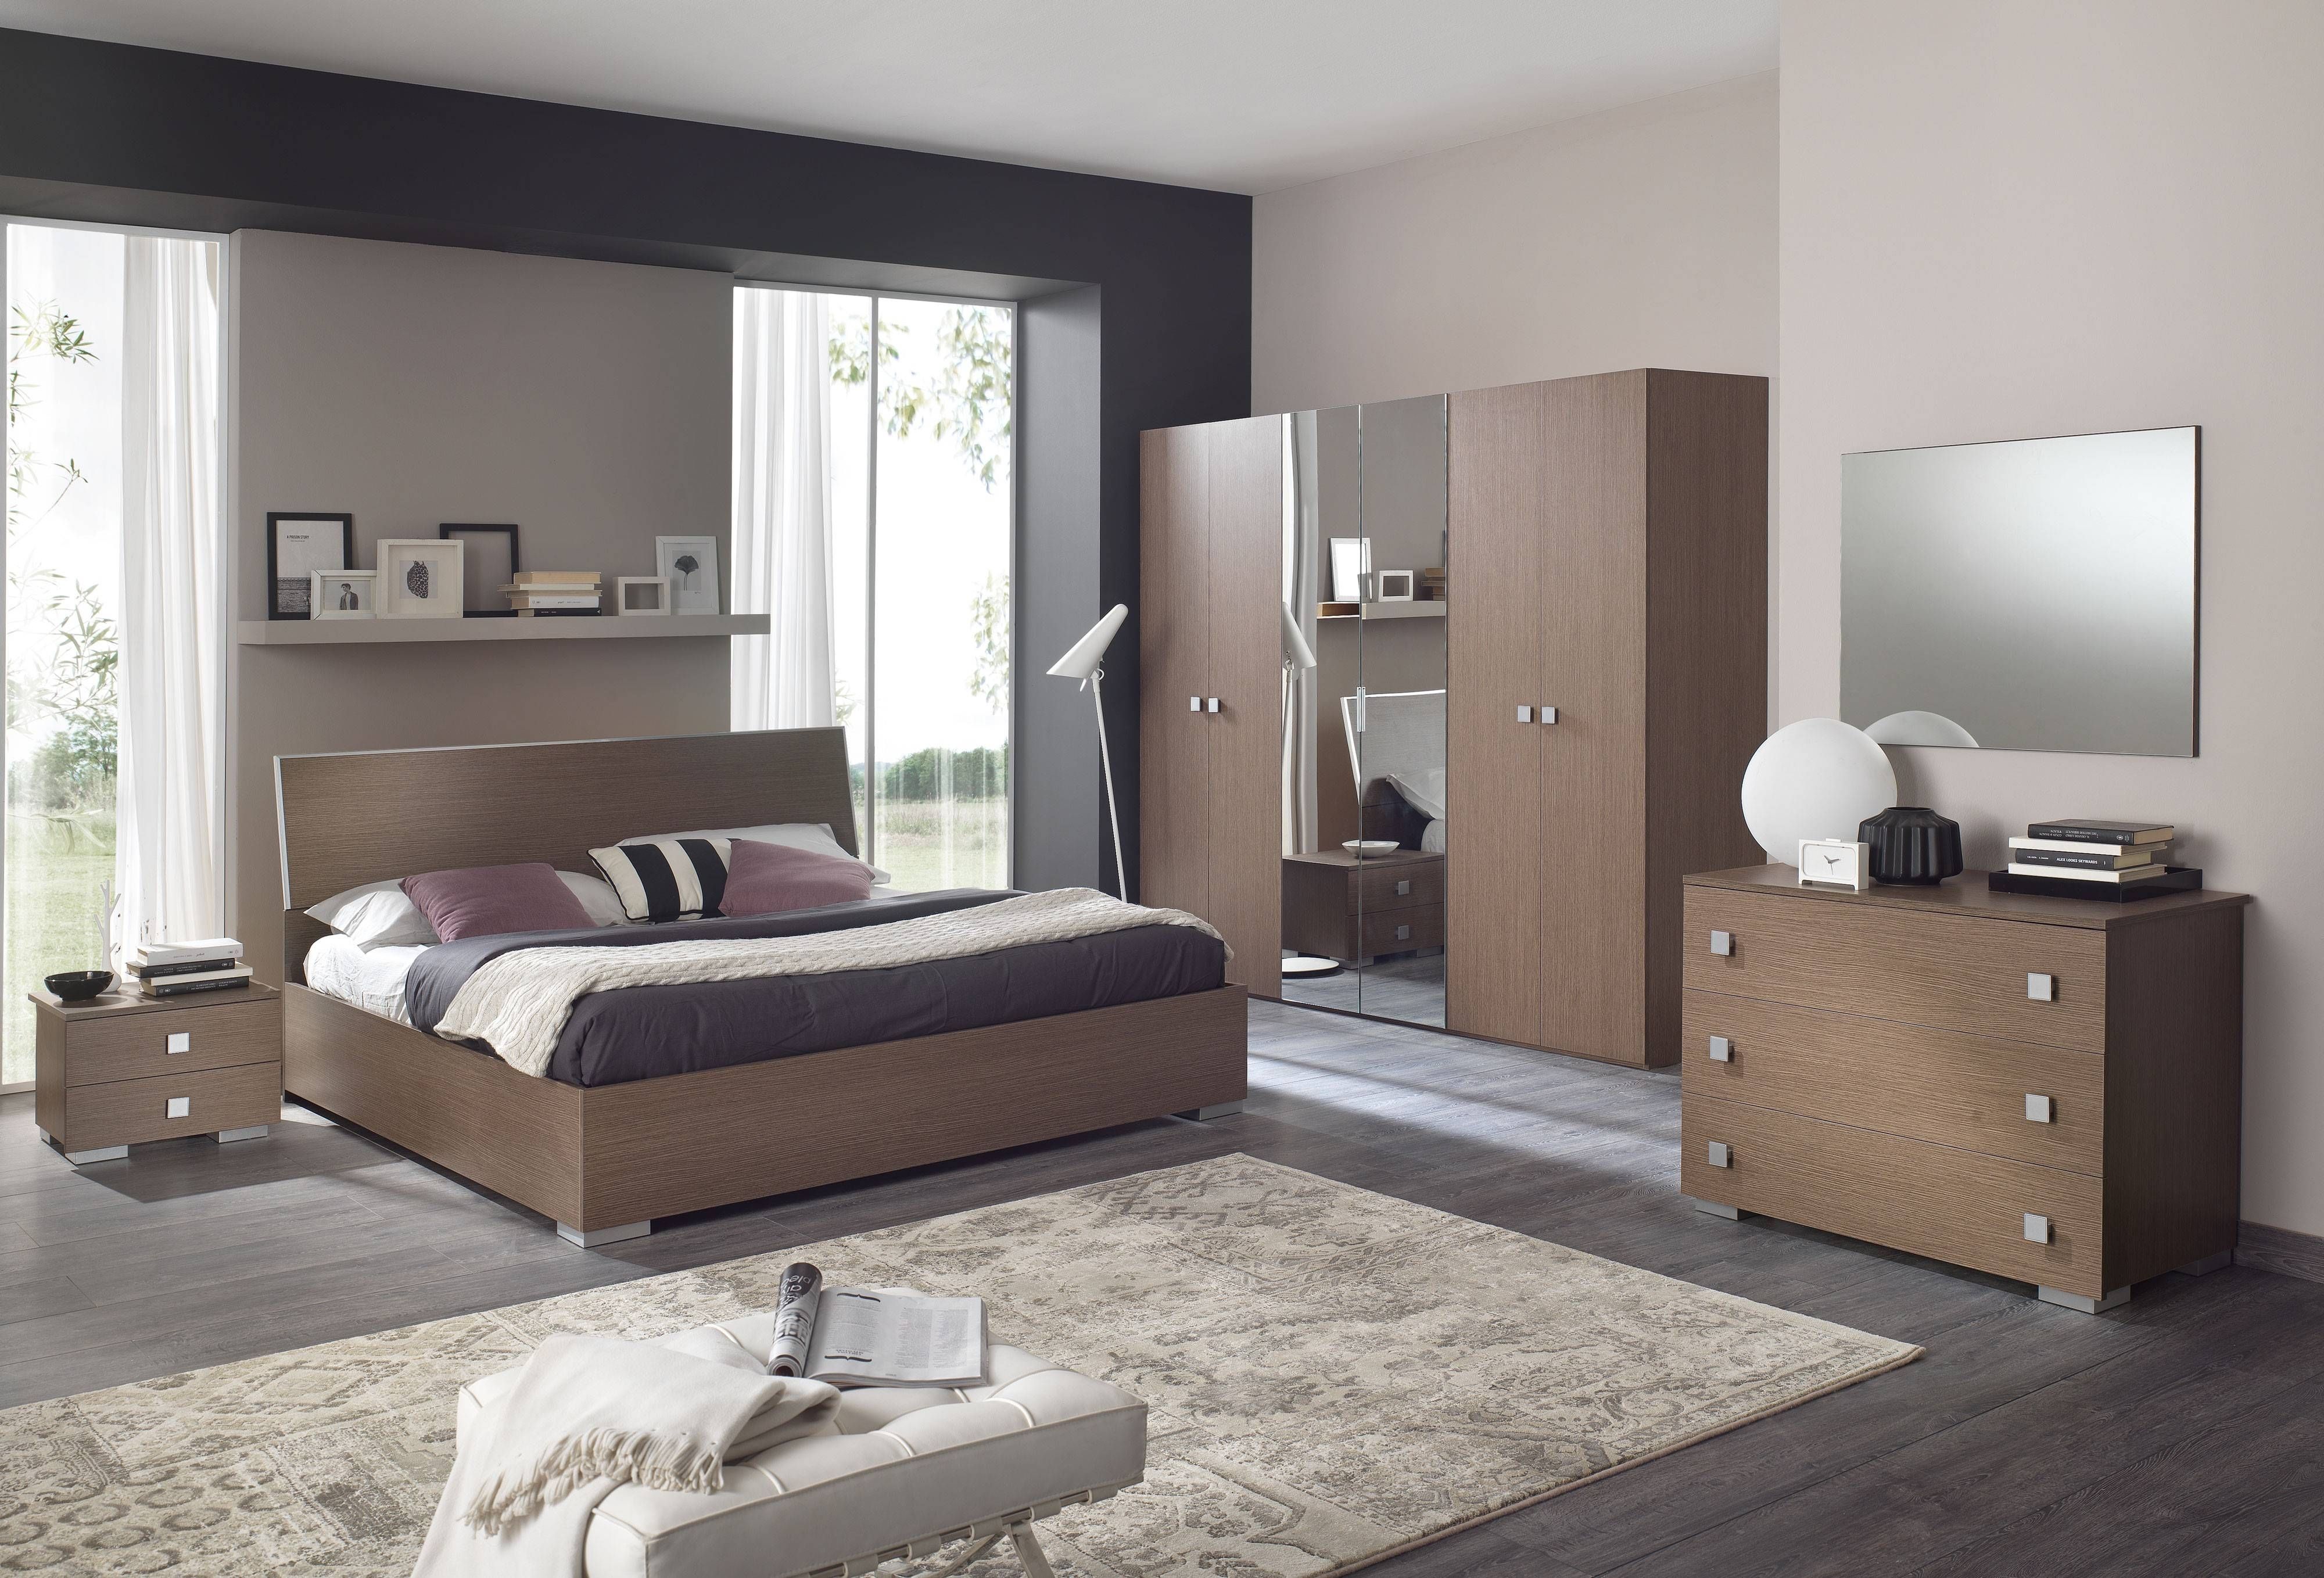 Bedrooms ~ Awesome Wardrobes With Mirror Designs Latest Beds With Regard To Dark Wood Wardrobe With Mirror (View 18 of 30)